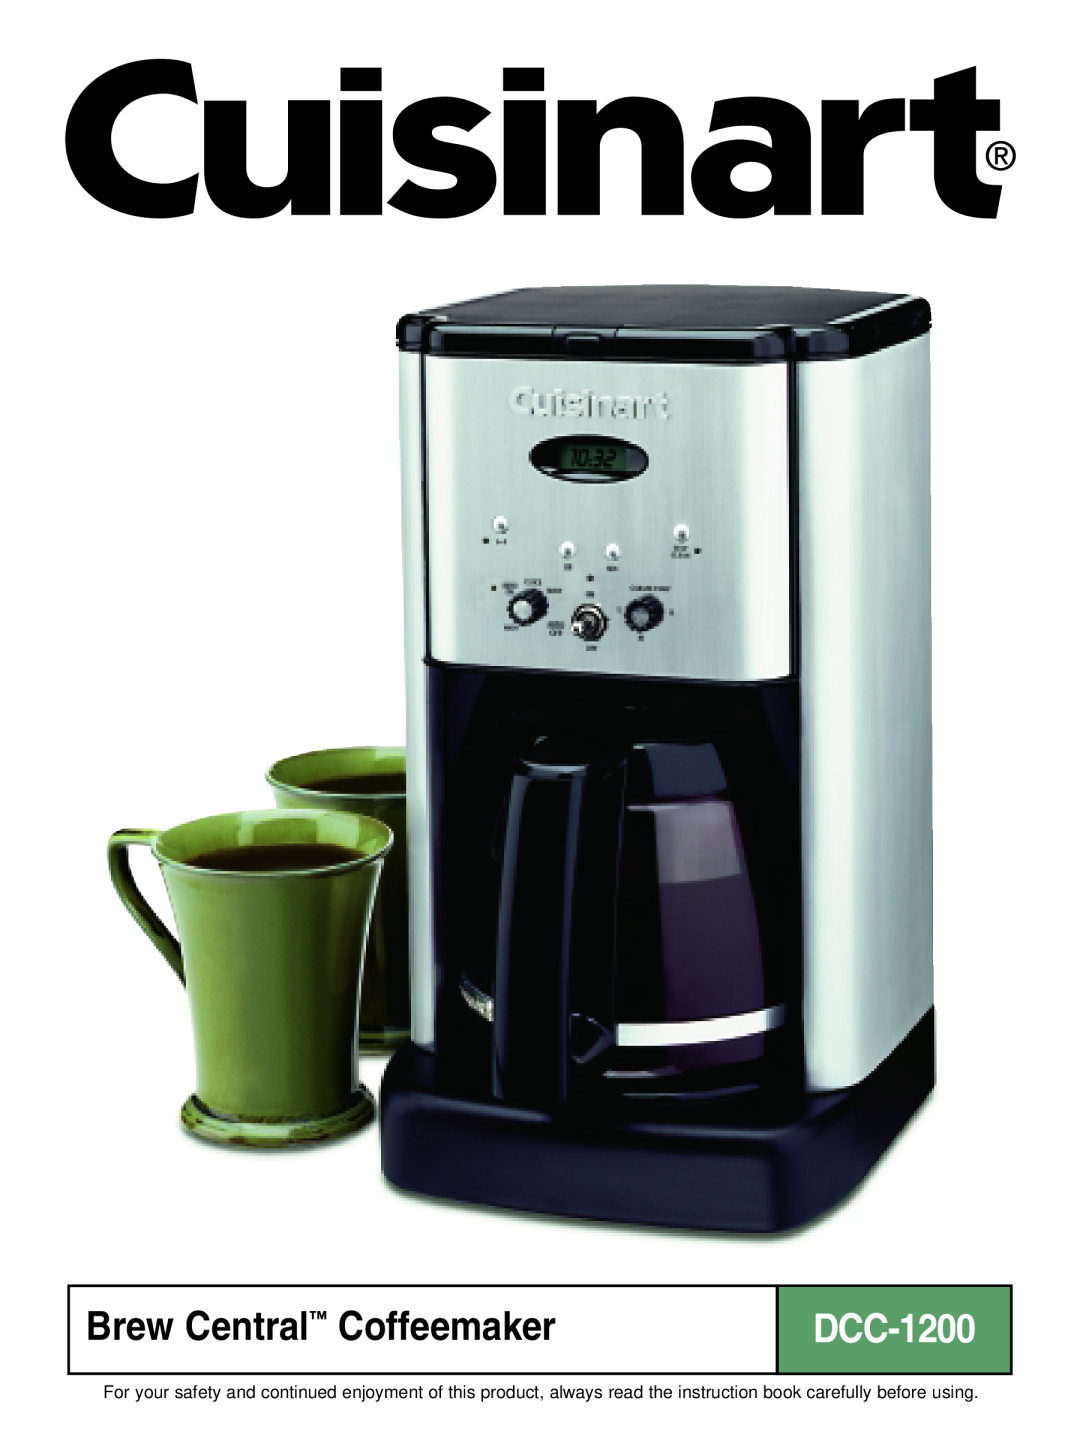 Cuisinart DCC-1200 manual Brew Central Coffeemaker 